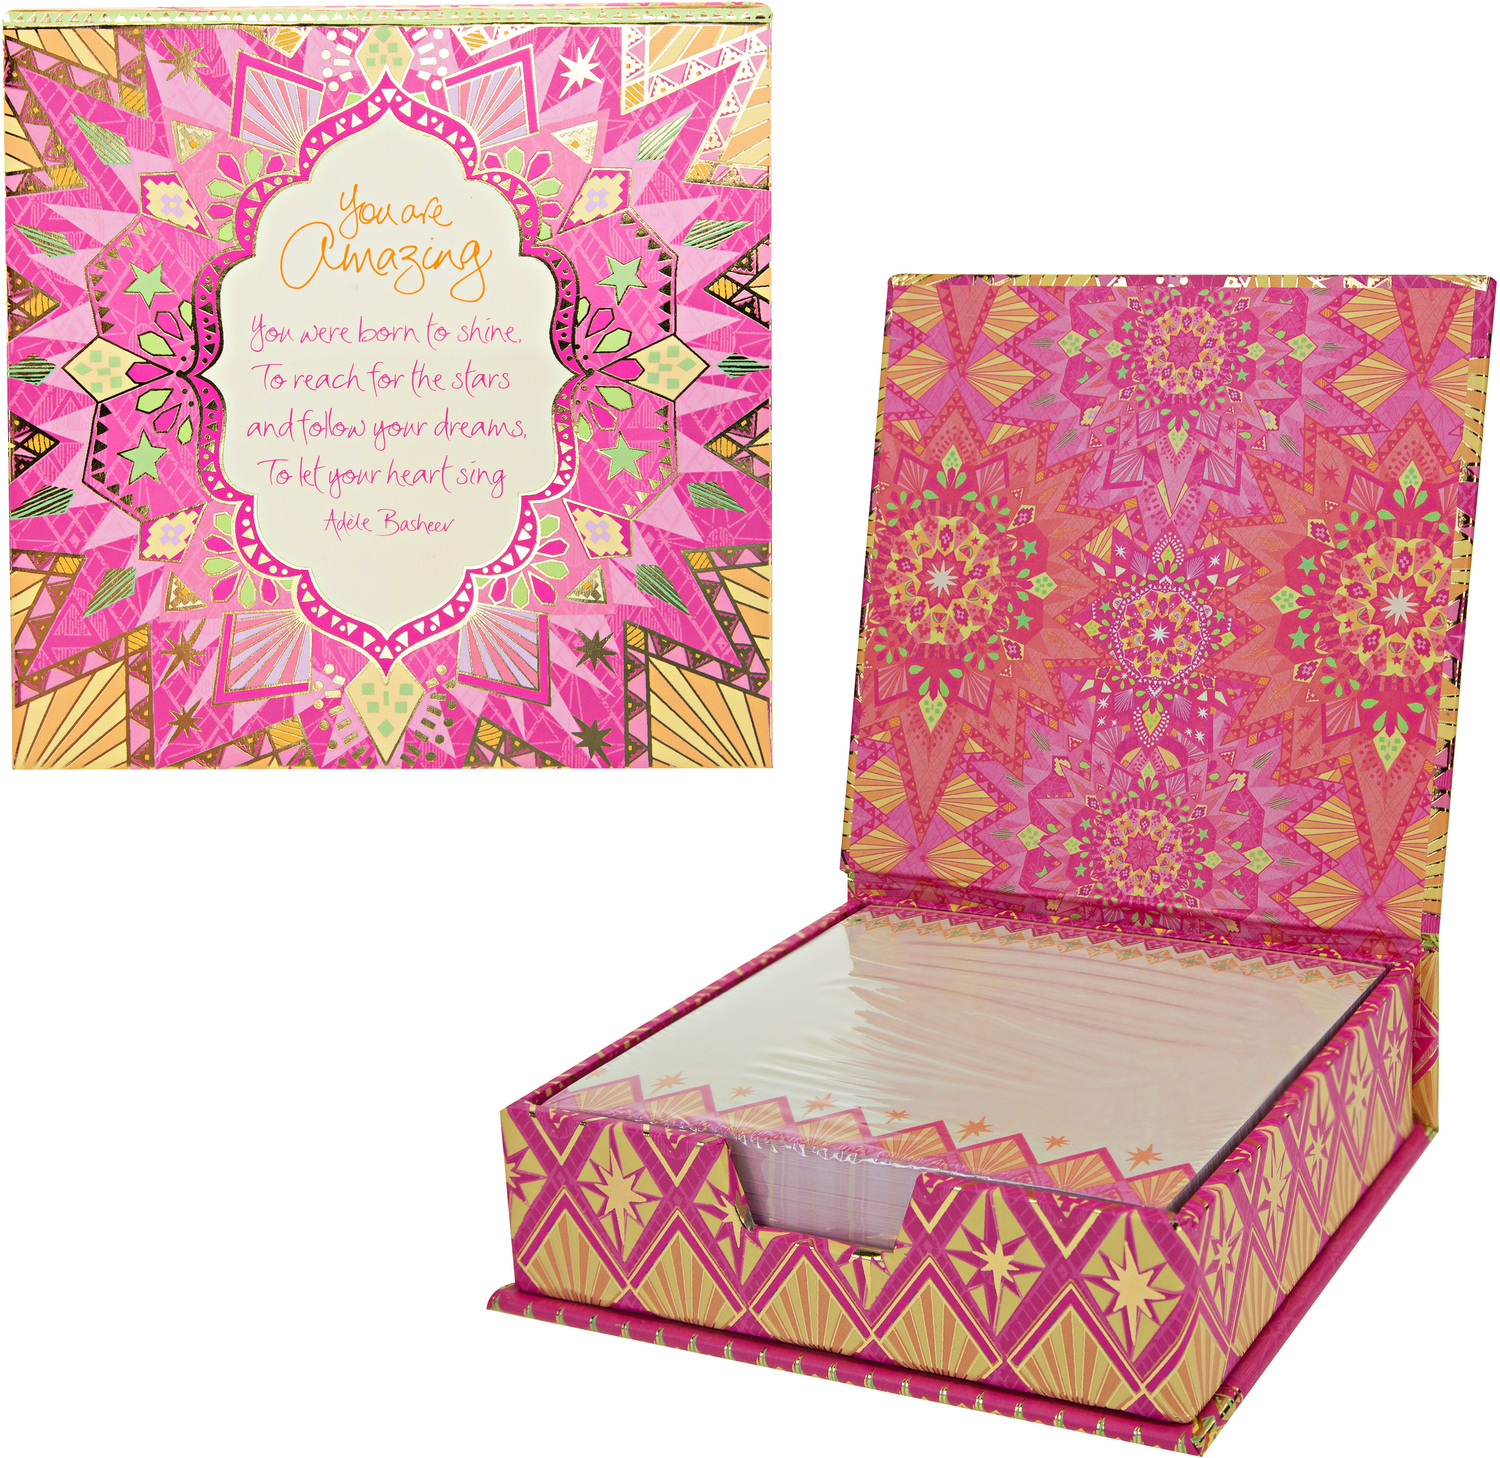 You Are Amazing by Intrinsic - You Are Amazing - 5.25" x 5.25" x 1.75" Note Box